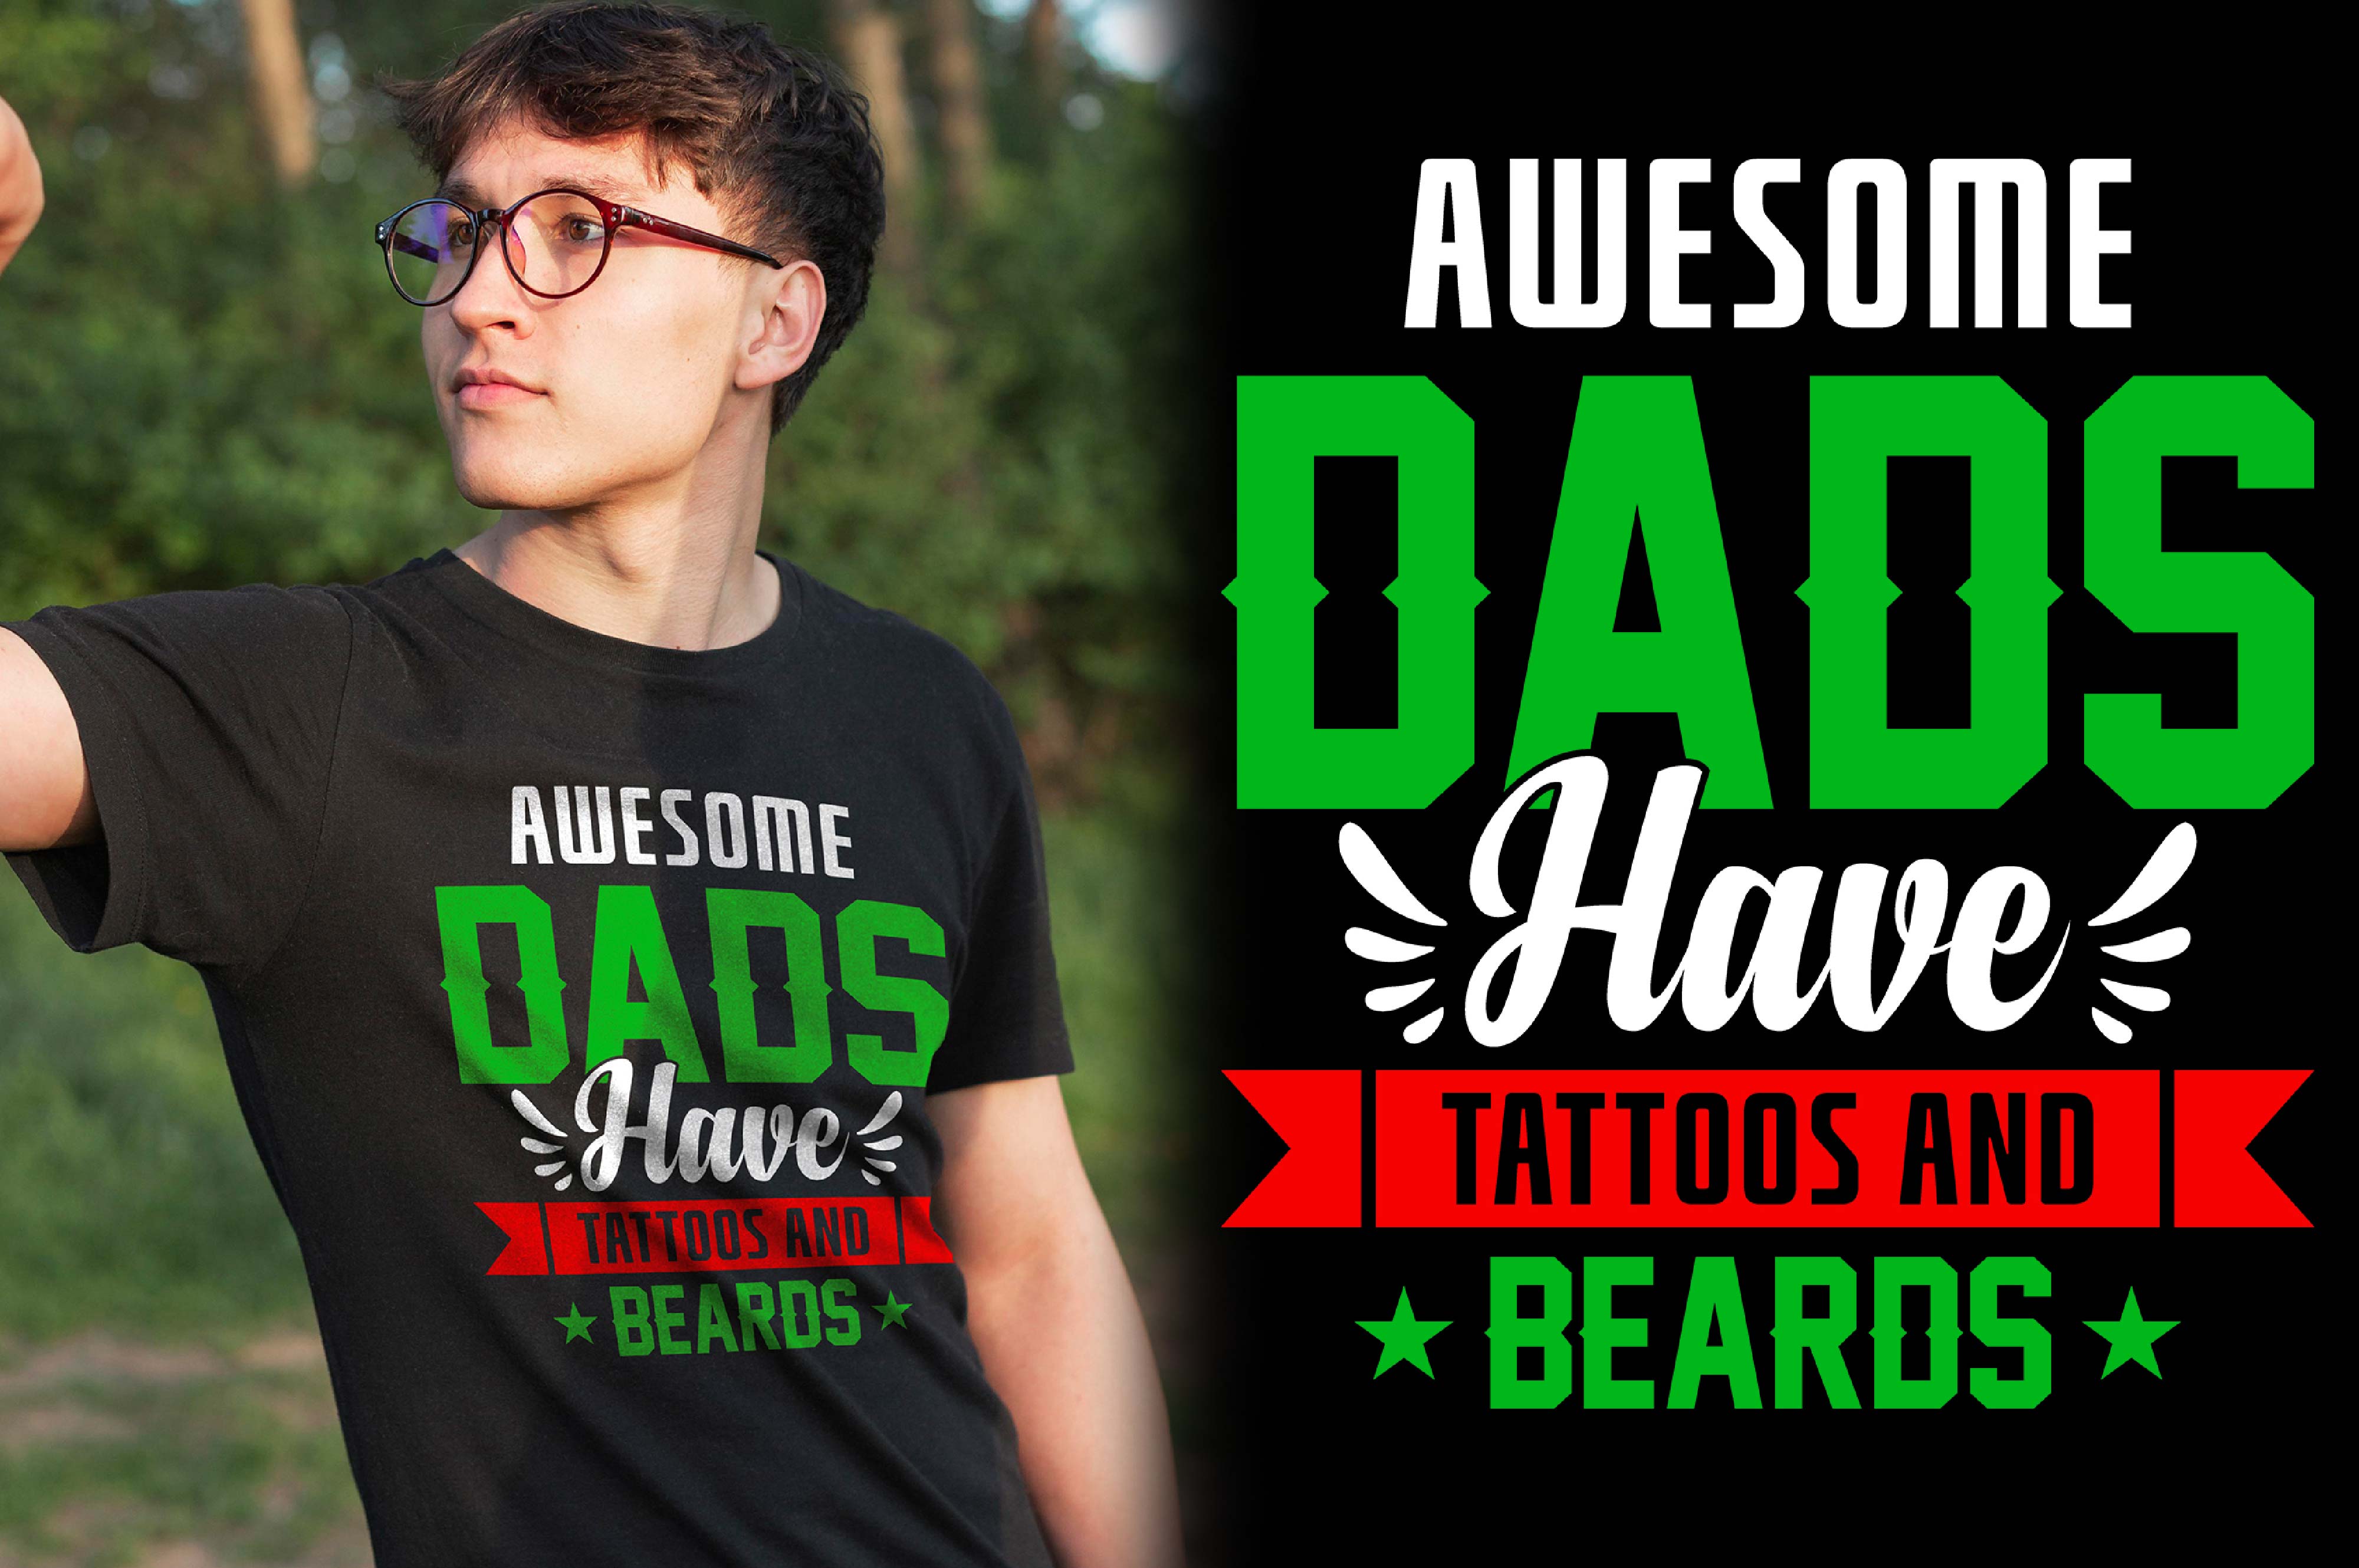 Man wearing a t - shirt that says awesome dads have tattoos and beard.